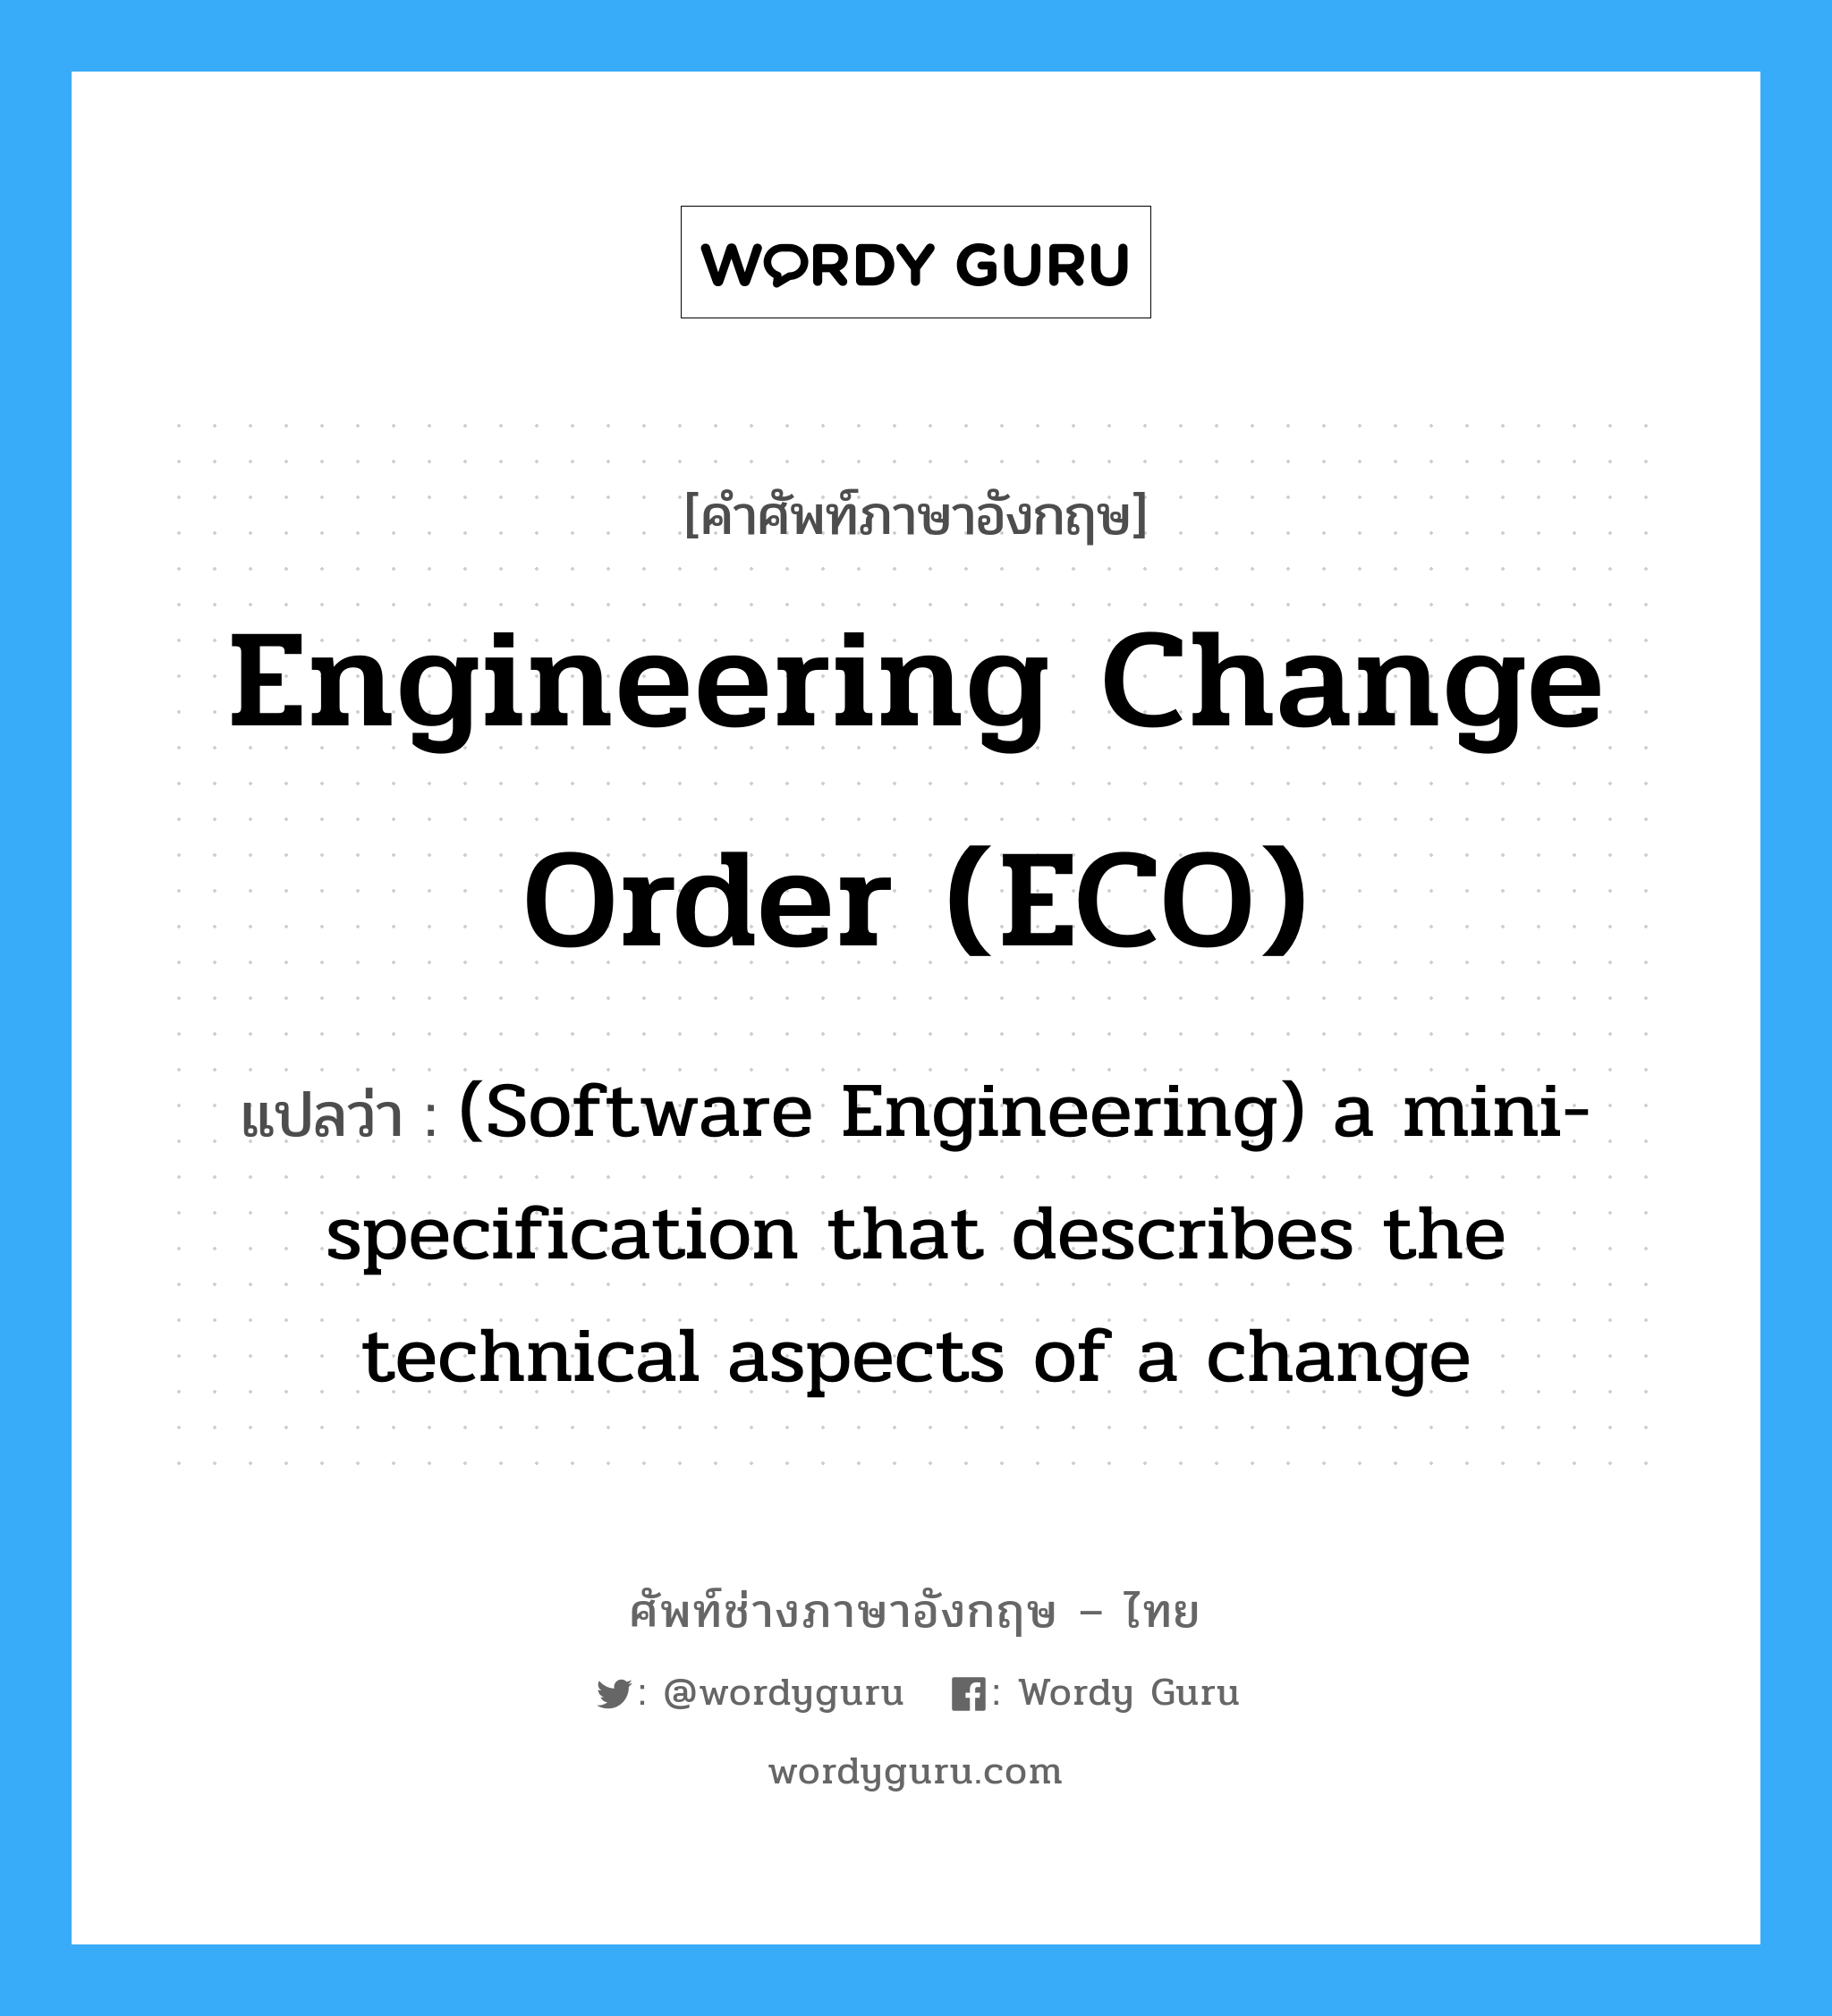 Engineering change order (ECO) แปลว่า?, คำศัพท์ช่างภาษาอังกฤษ - ไทย Engineering change order (ECO) คำศัพท์ภาษาอังกฤษ Engineering change order (ECO) แปลว่า (Software Engineering) a mini-specification that describes the technical aspects of a change